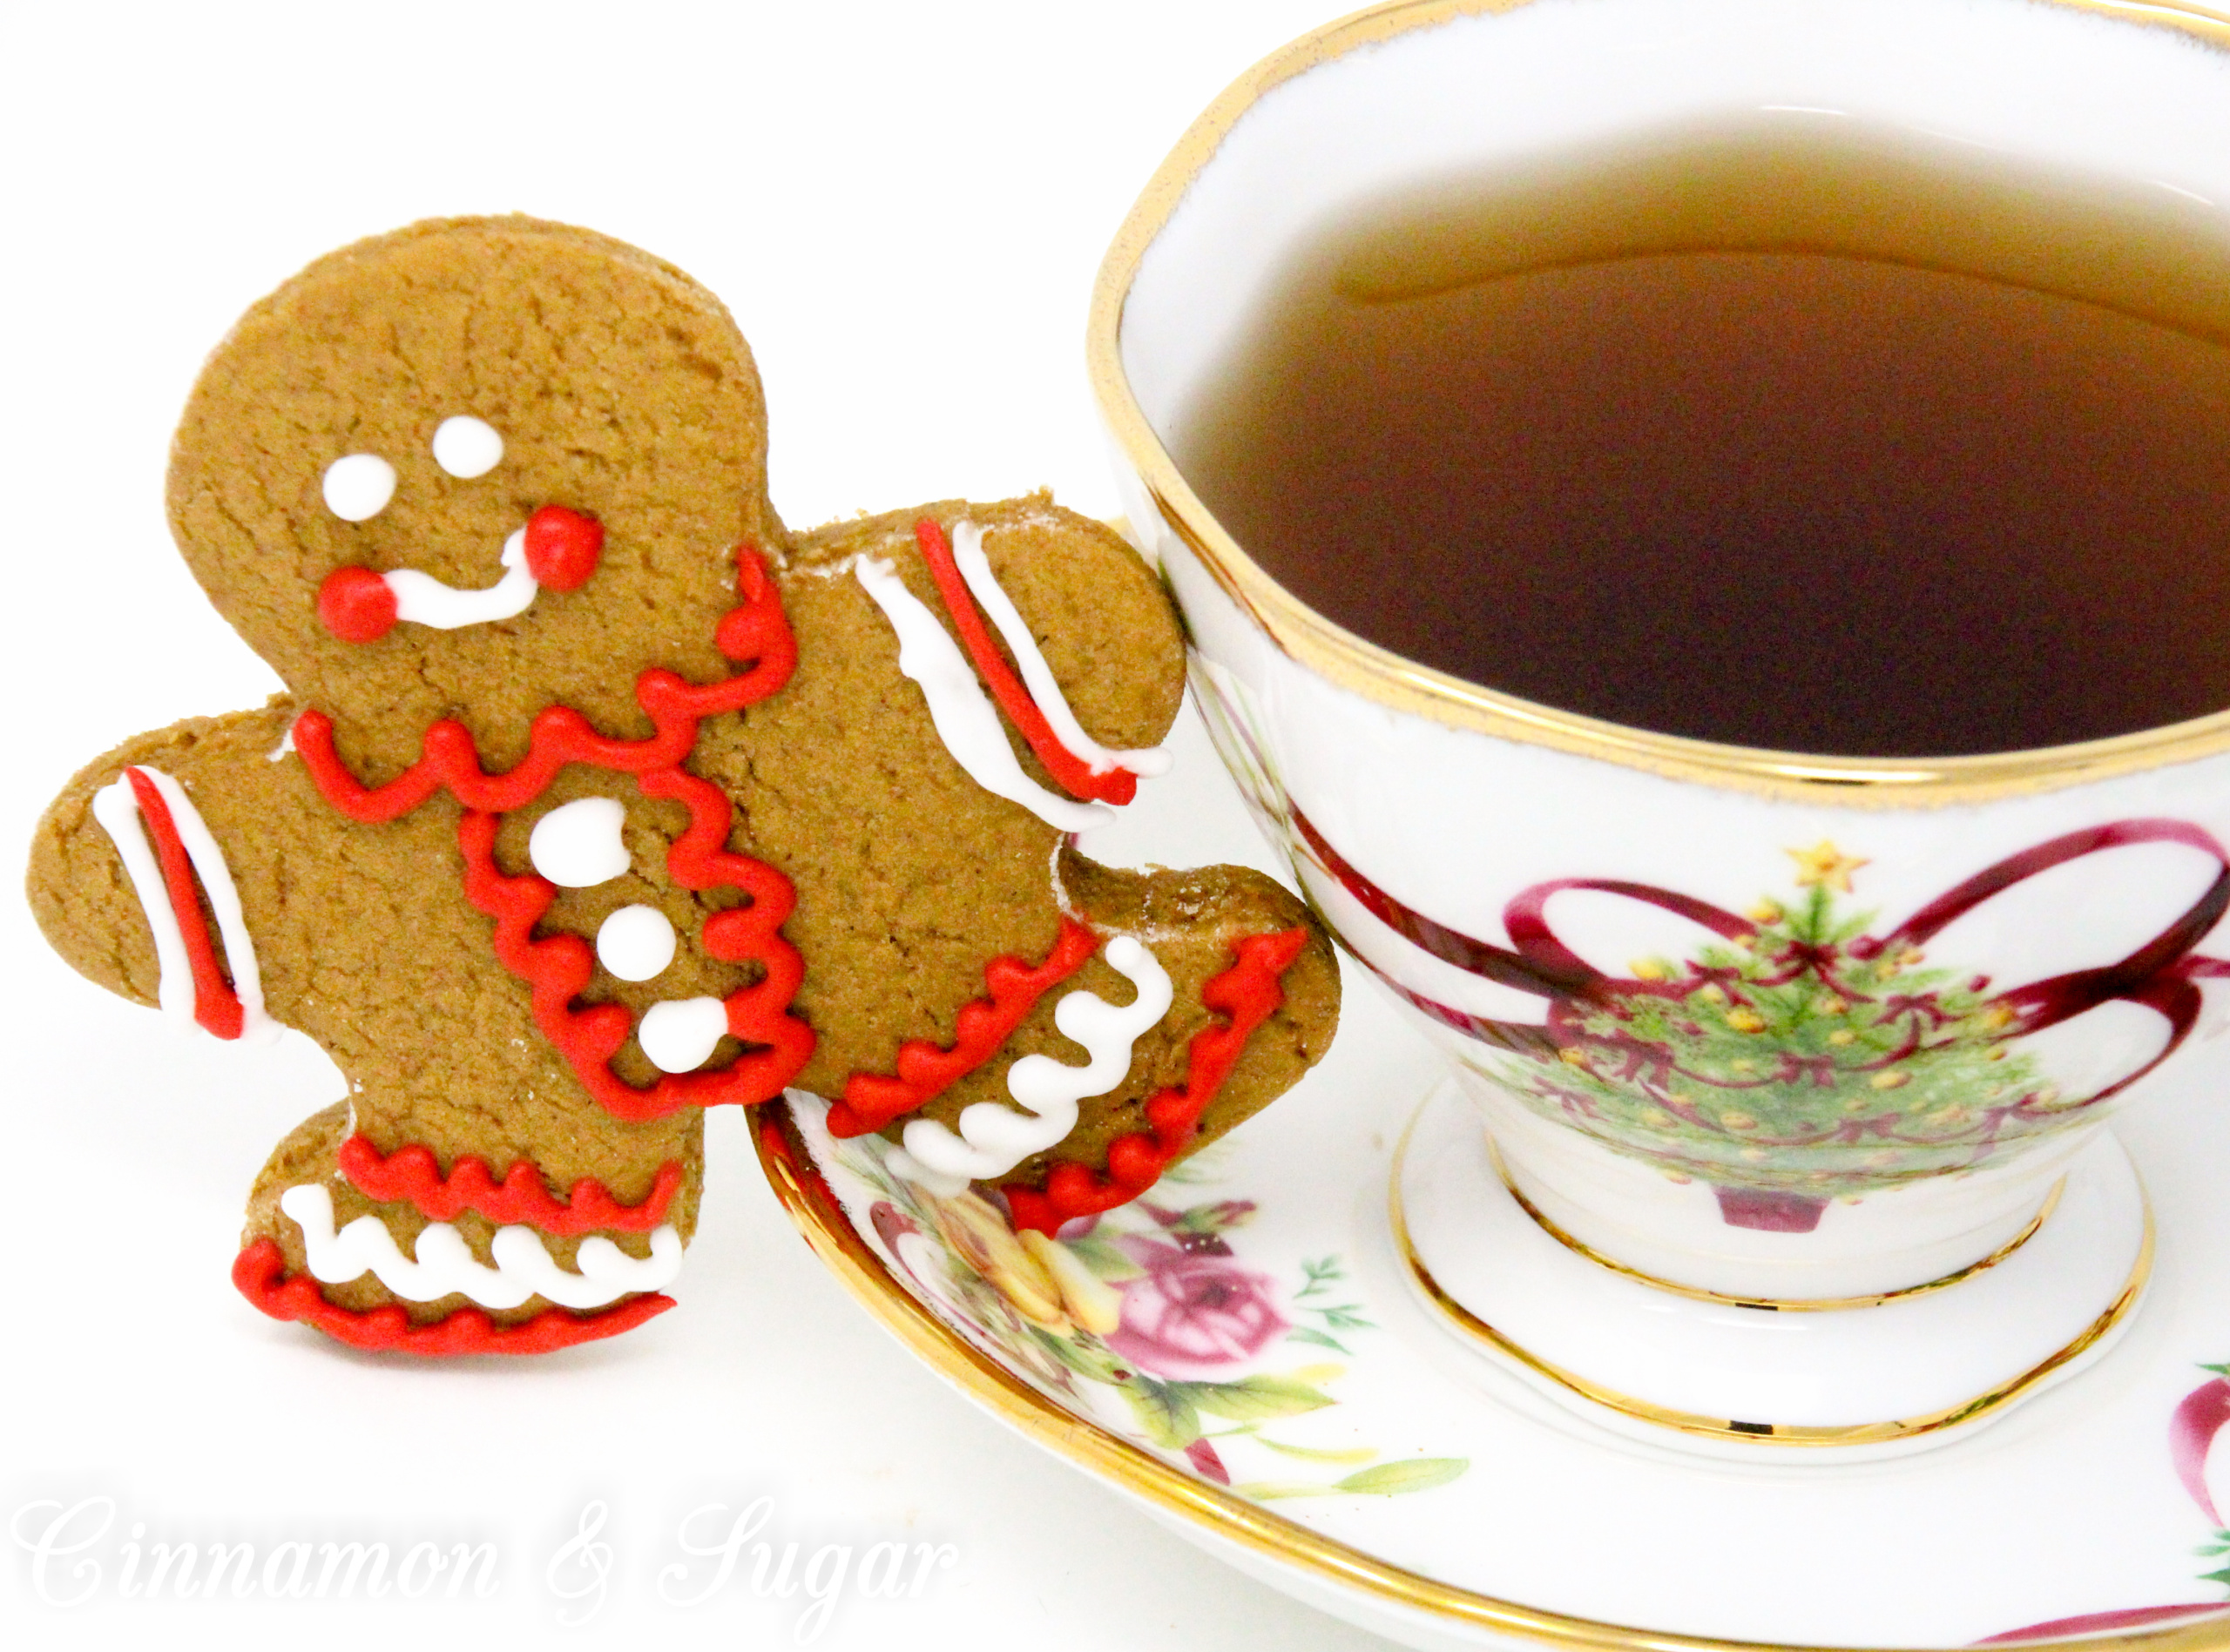 Gingerbread People are sweet, spiced cutout cookies that remain soft instead of overly crunchy. While gingerbread cookies are associated with Christmas, these yummy cookies are delicious anytime you desire a satisfying spiced cookie! Recipe shared with permission granted by Maddie Day, author of CANDY SLAIN MURDER.